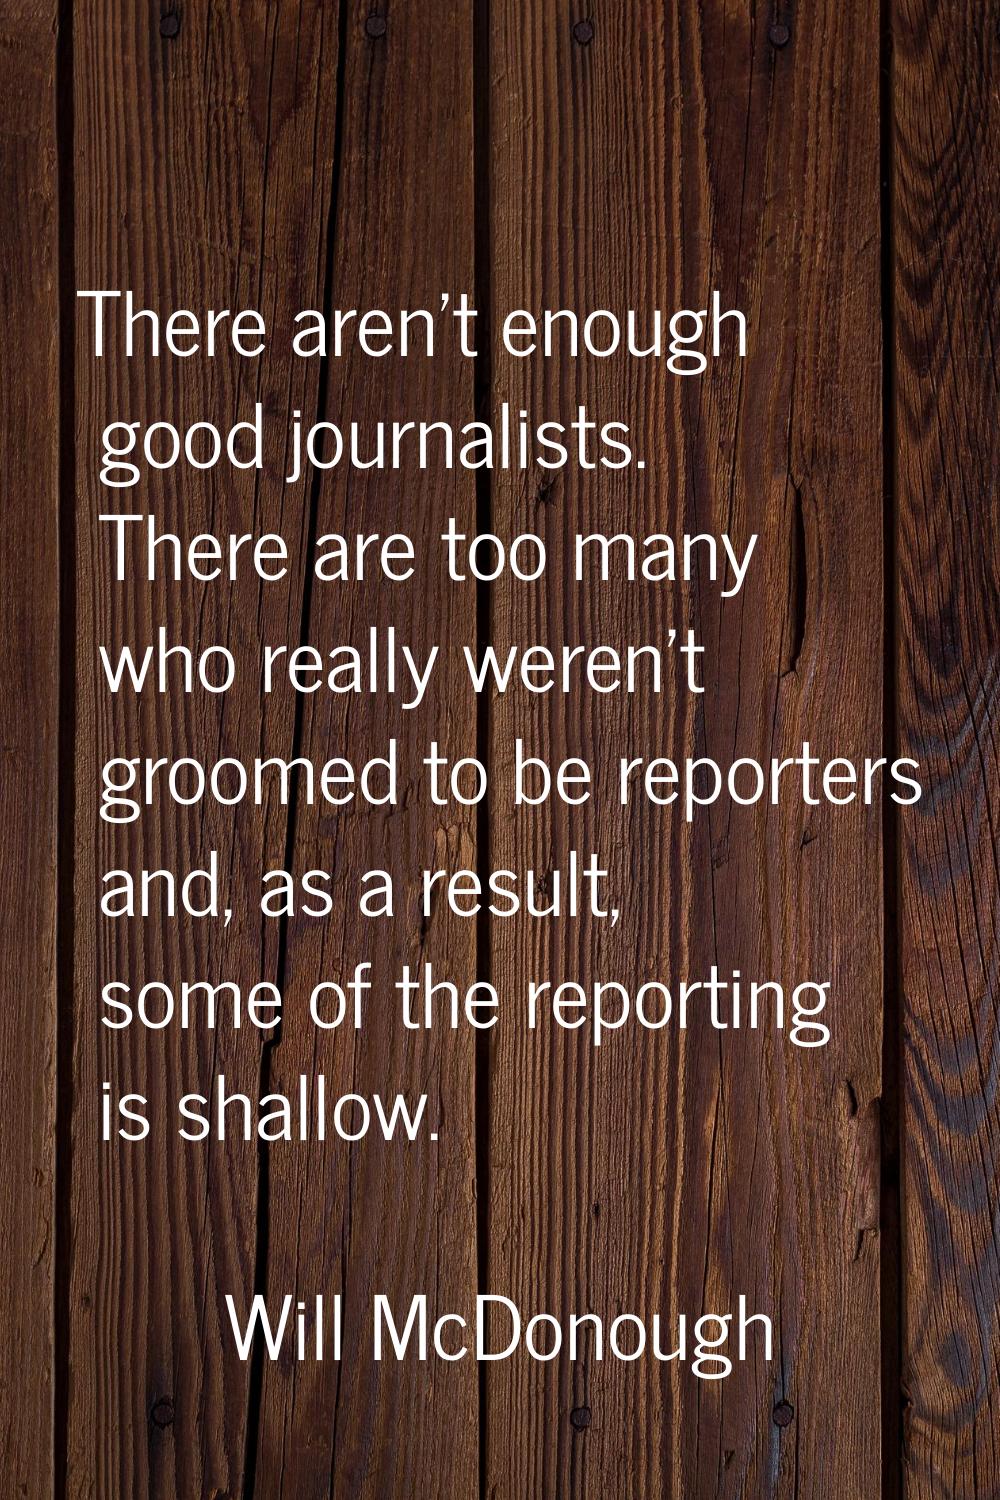 There aren't enough good journalists. There are too many who really weren't groomed to be reporters